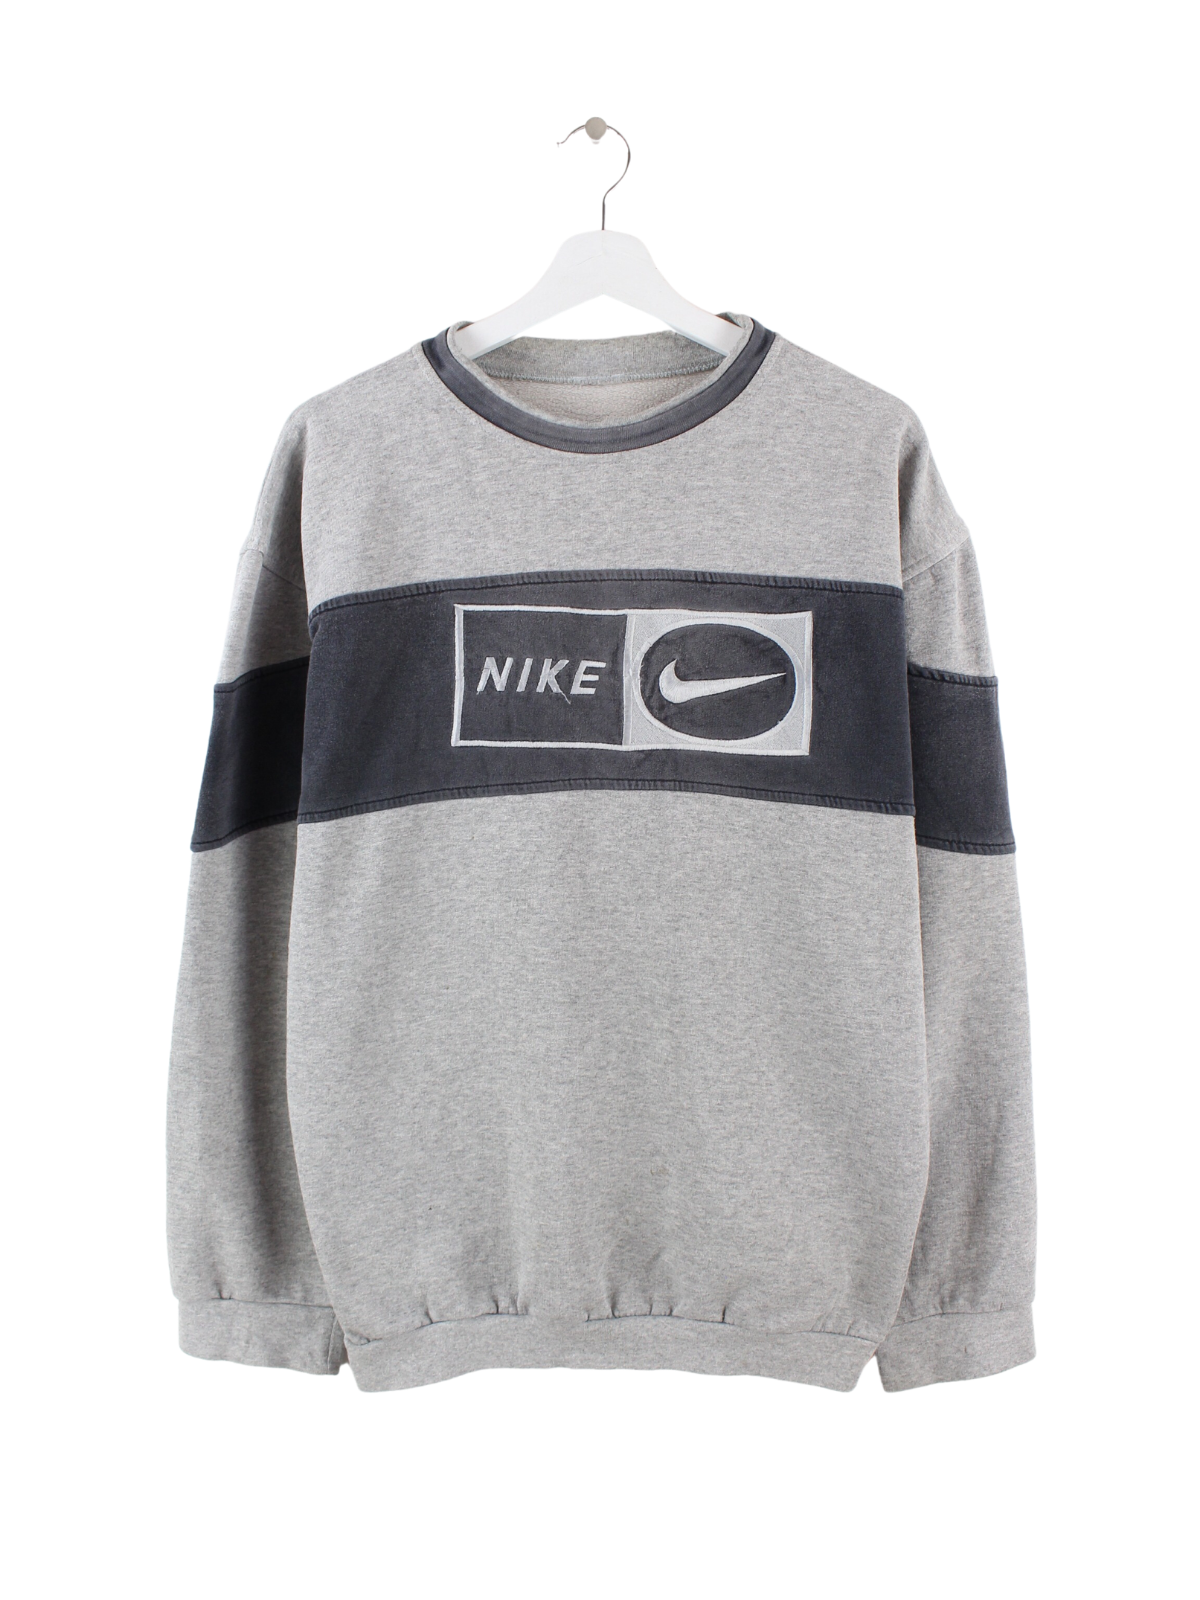 Nike 90s Embroidered Sweater Gray L